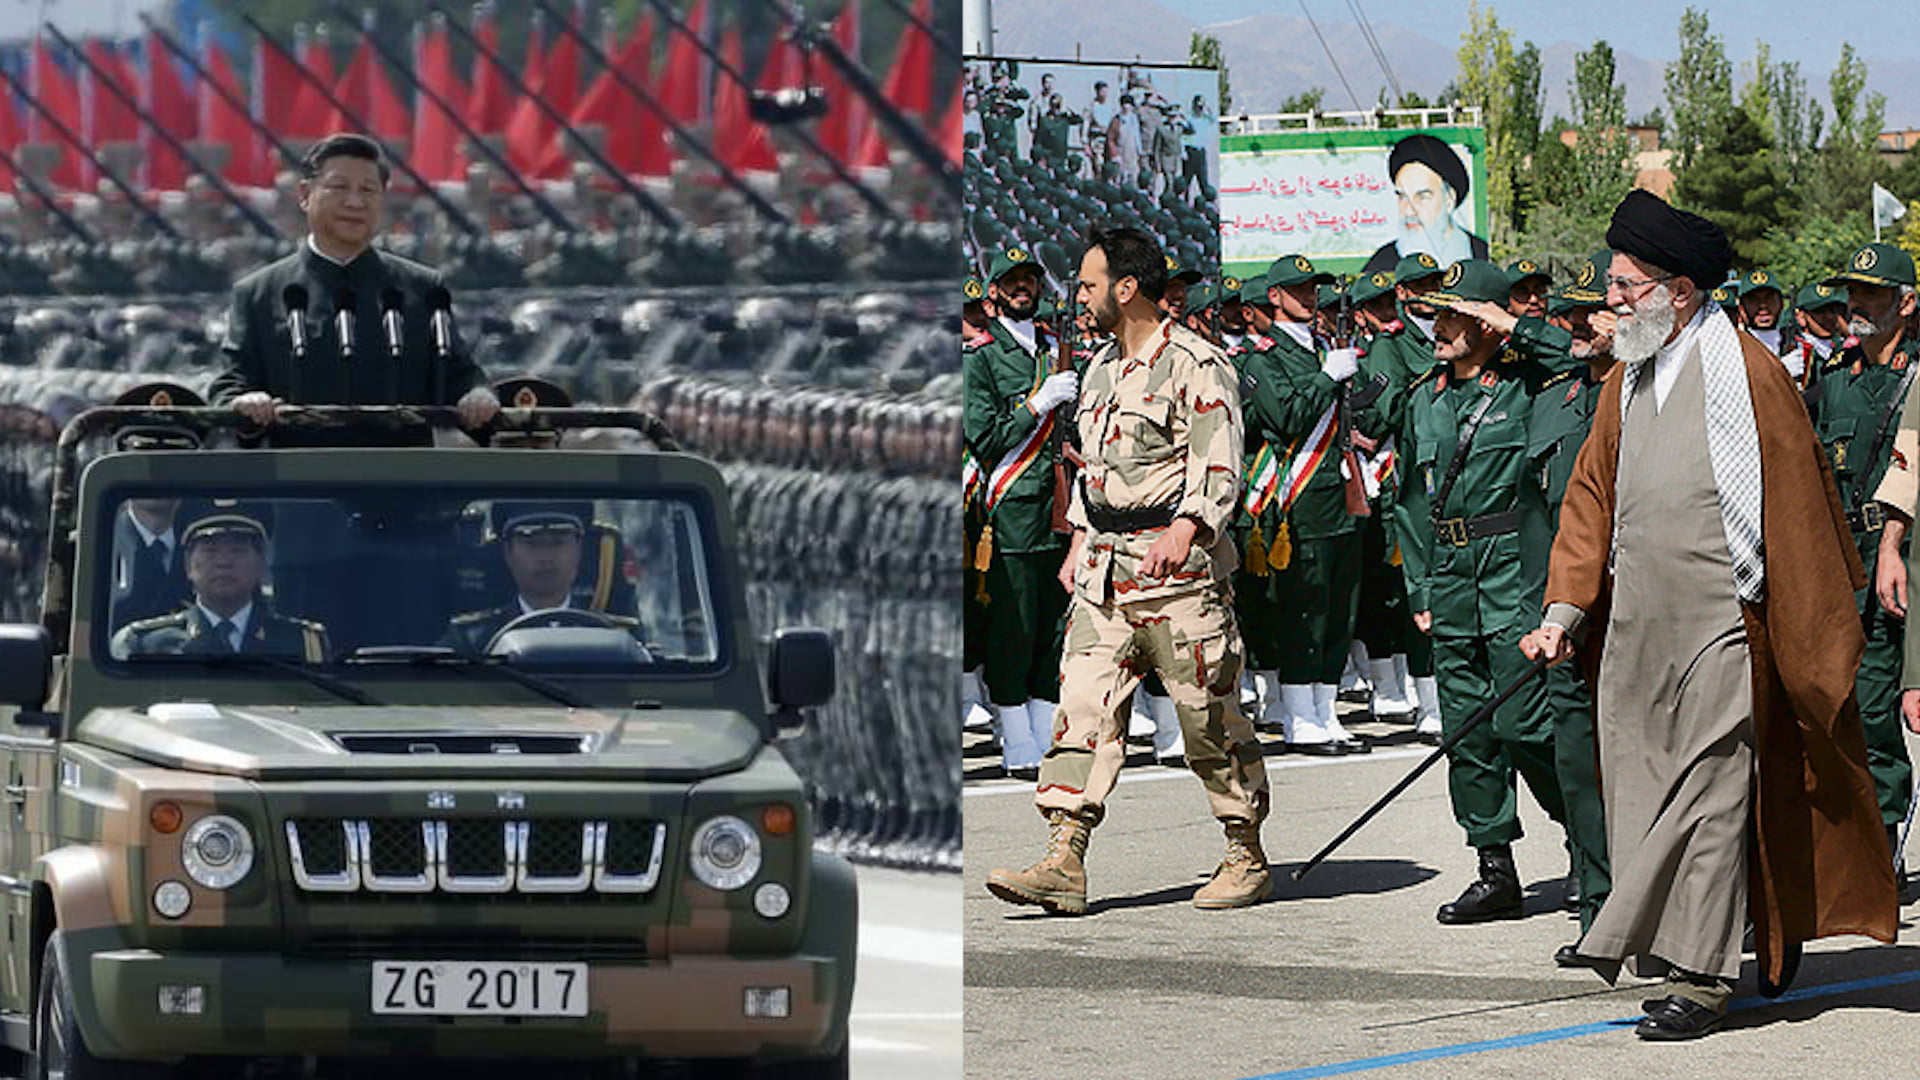 Iran's IRGC and China's Red Army Competitions and Crimes